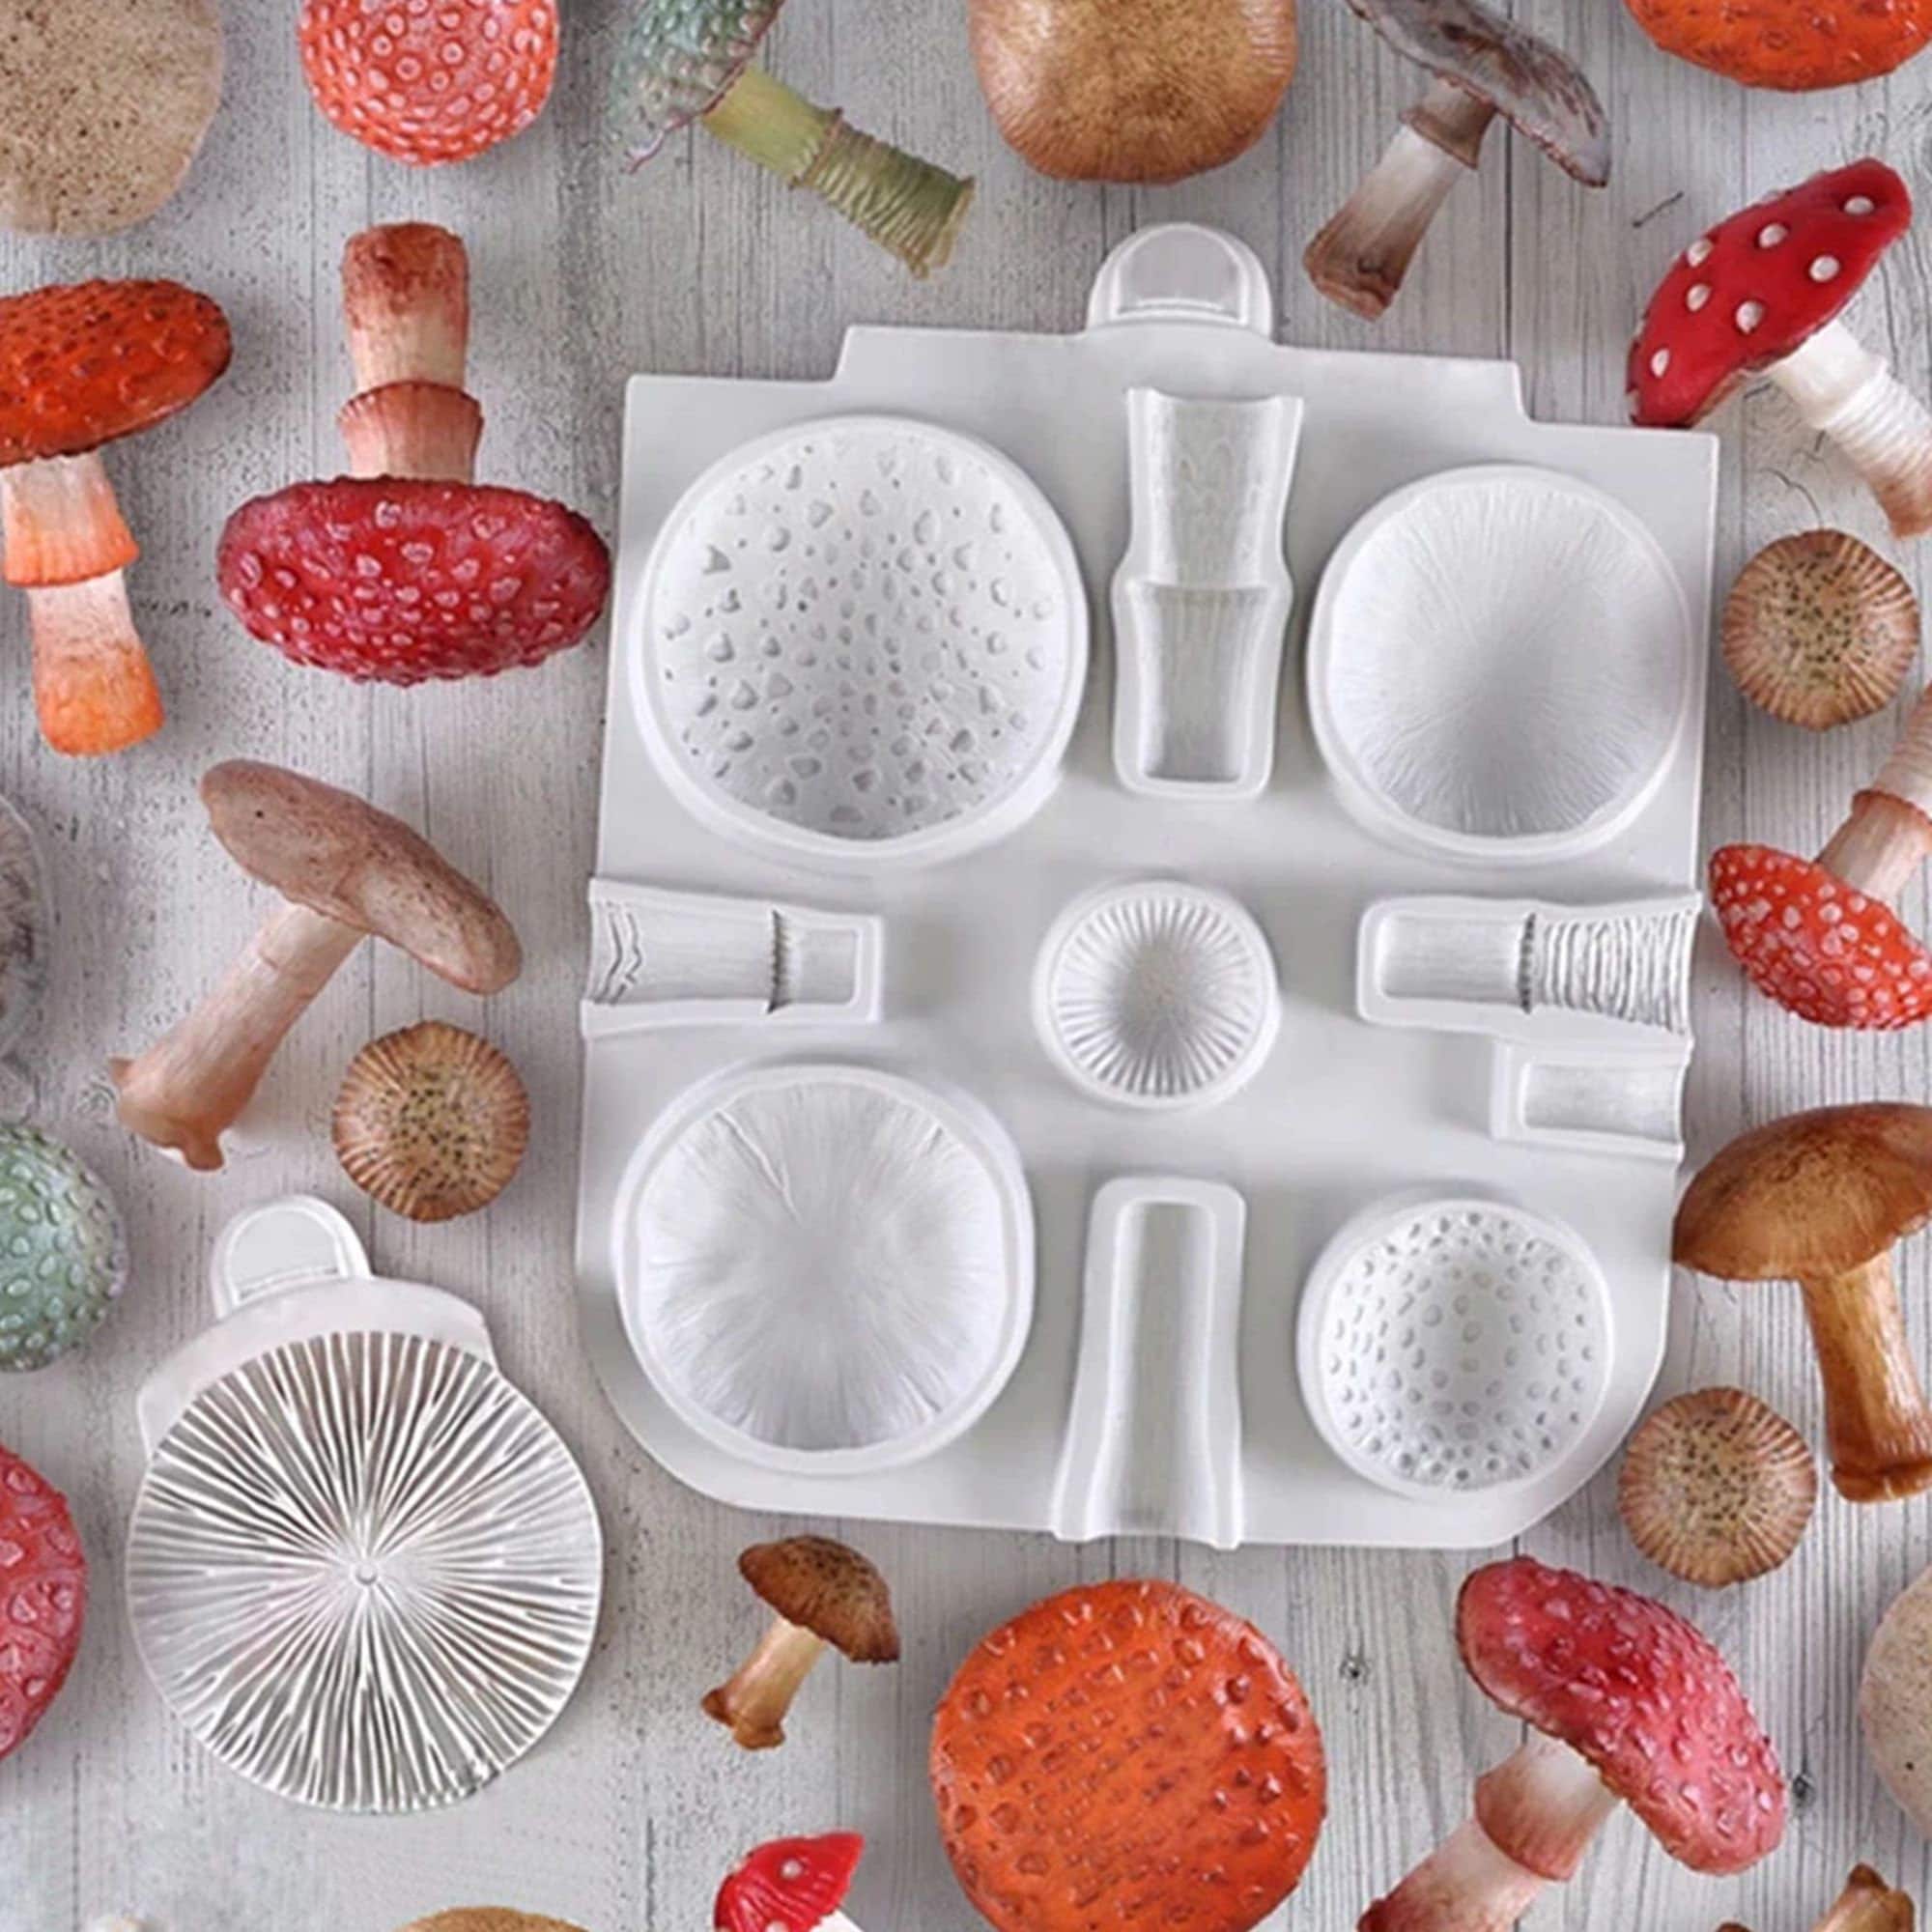 mushroom mold products for sale